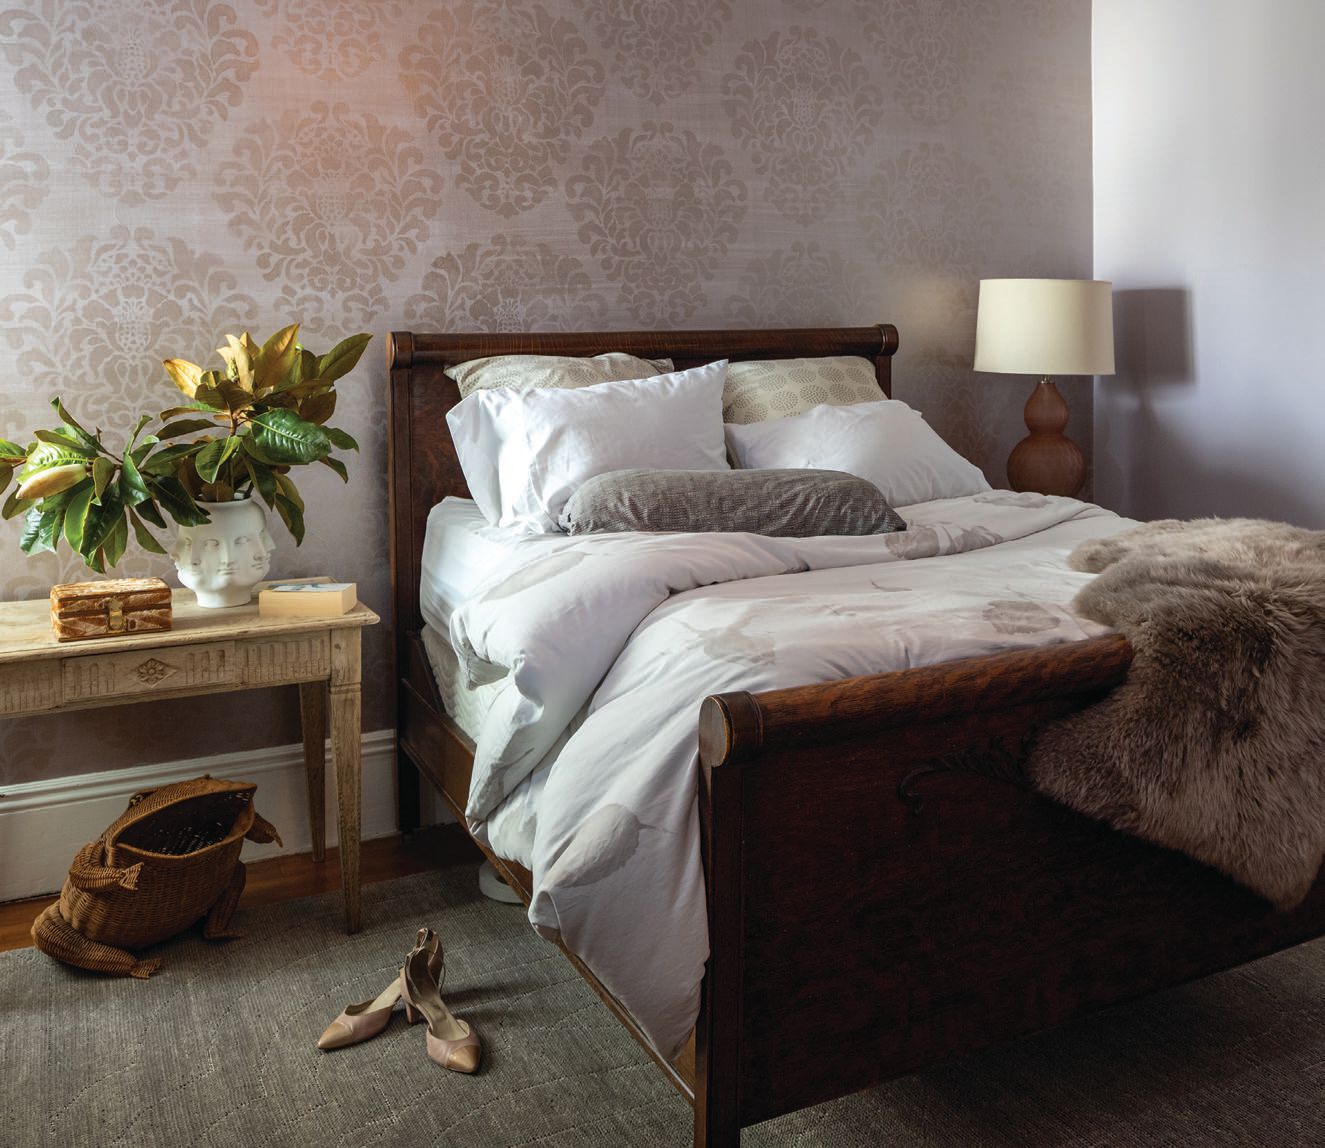 Designer Kress Jack layered in lots of patterns and textures into the bedrooms. PHOTOGRAPHED BY HELYNN OSPINA